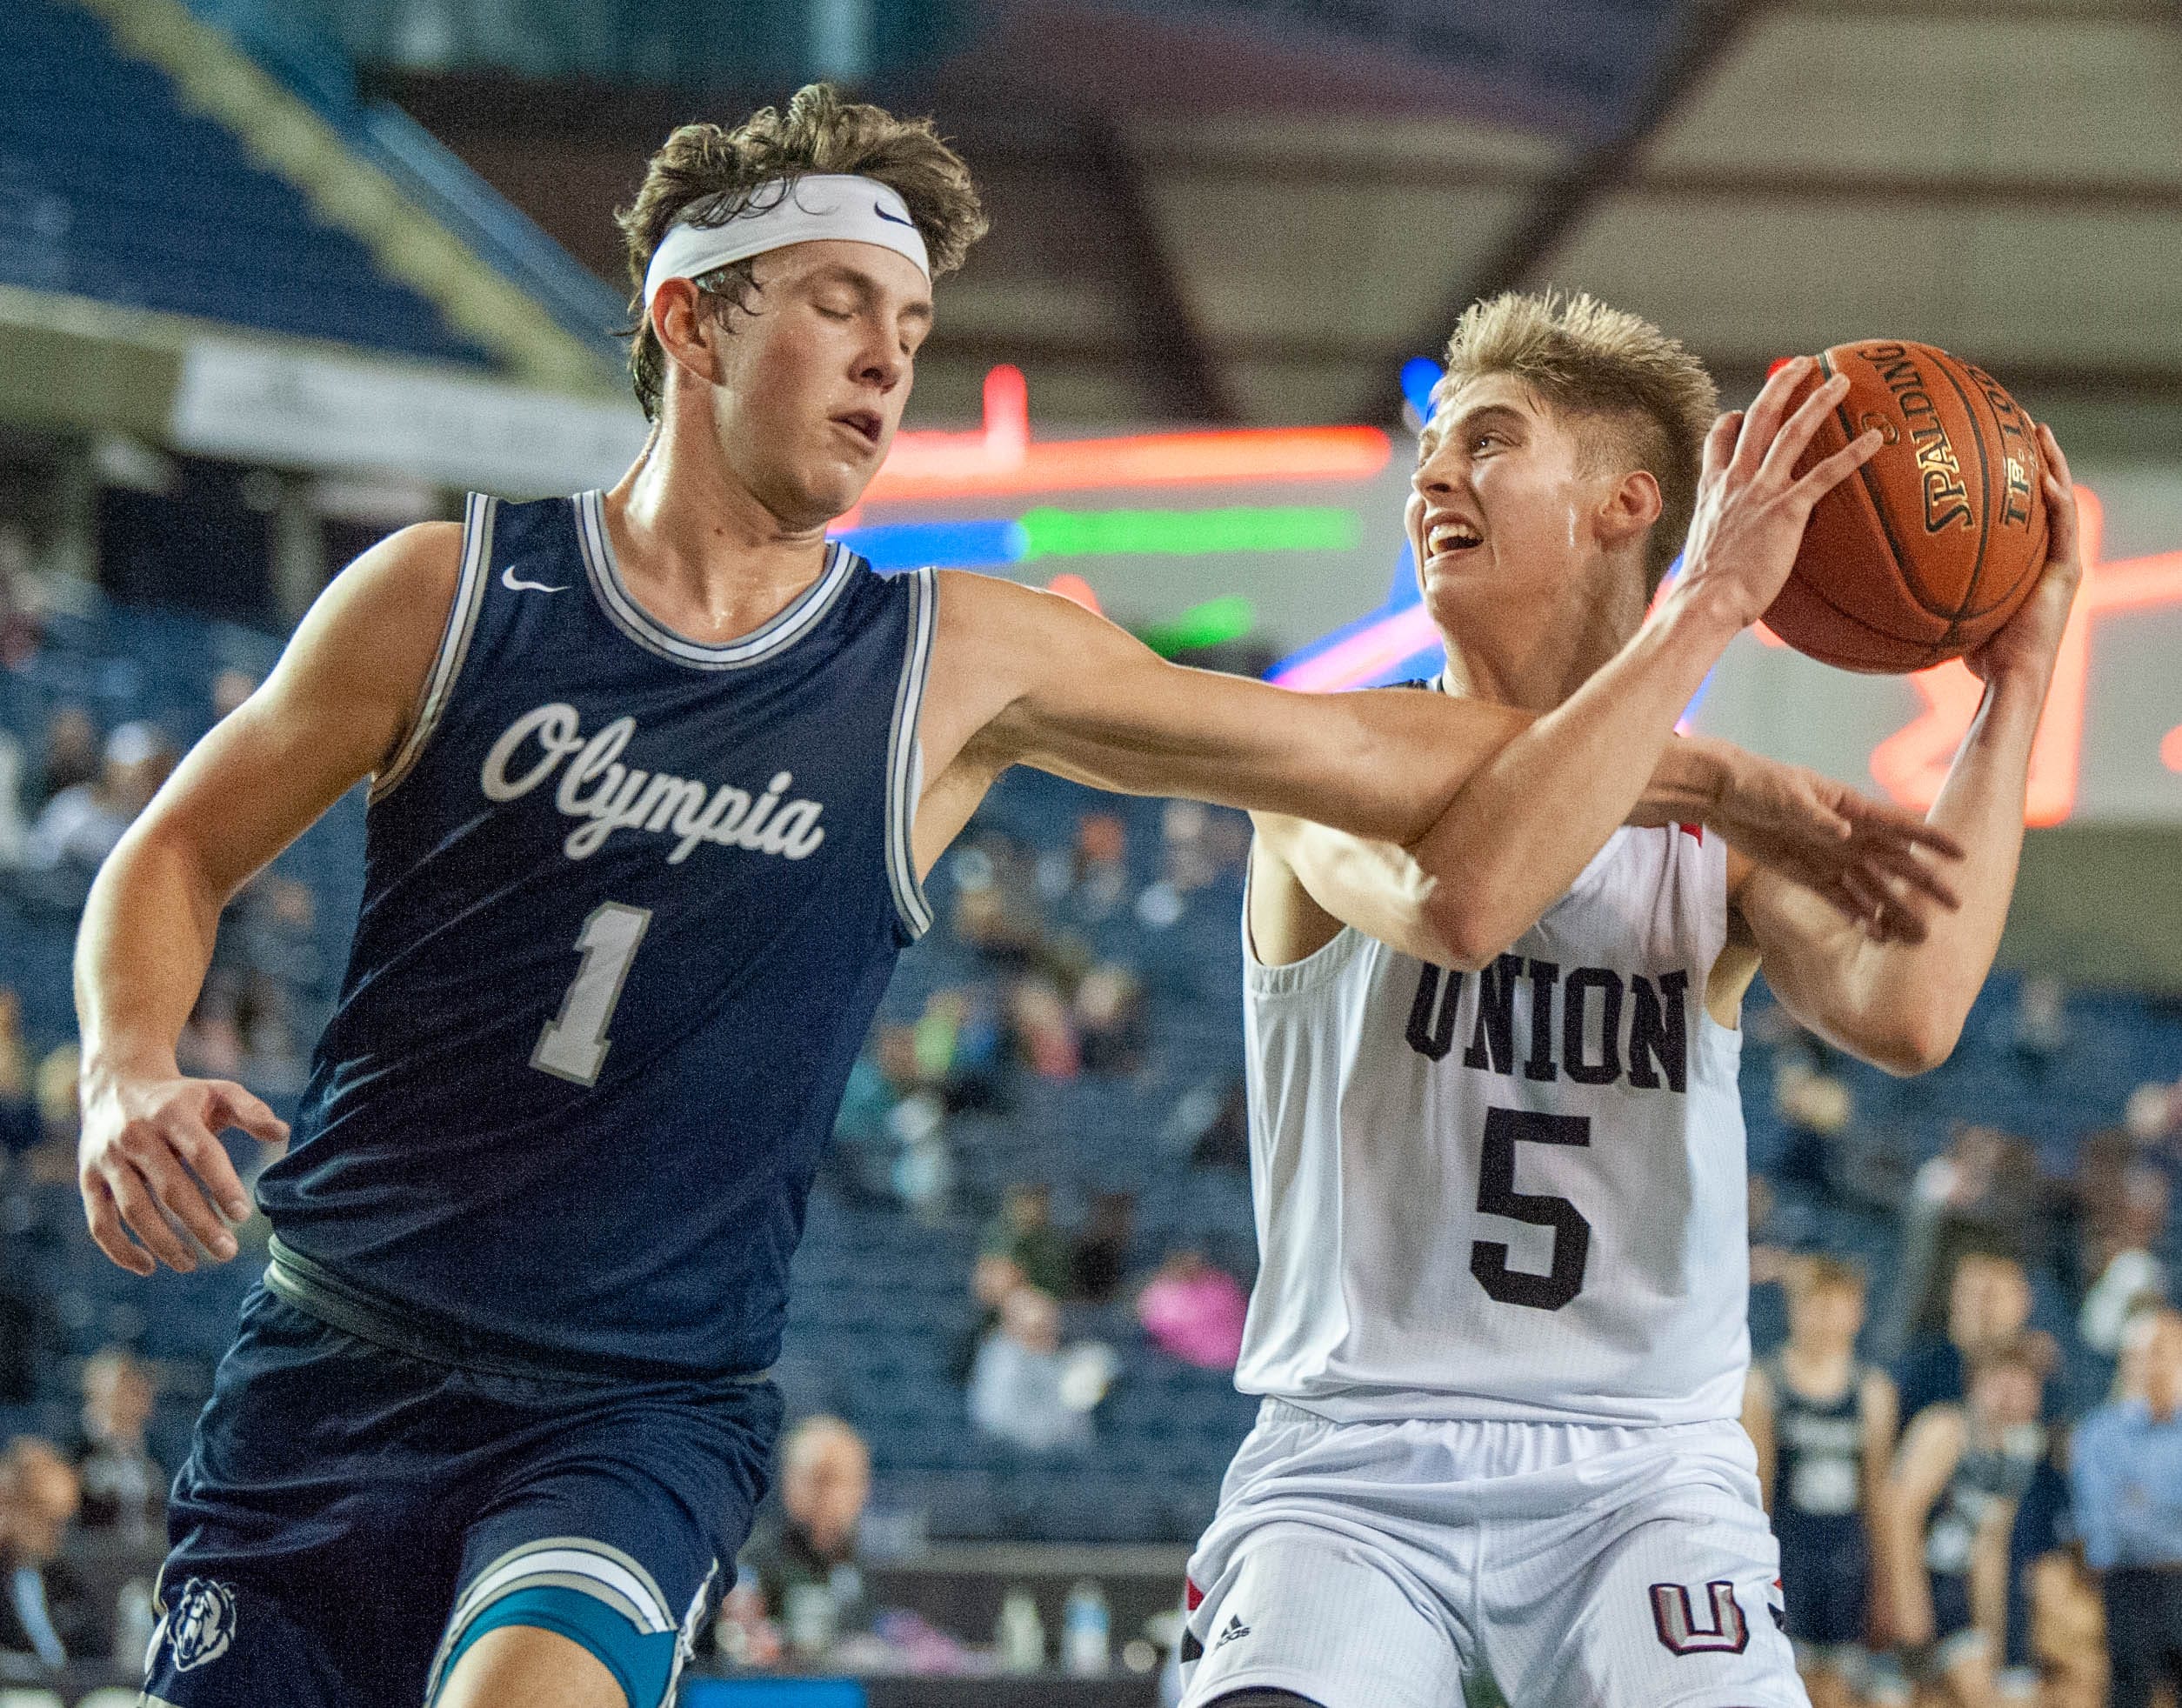 Olympia's Ethan Gahm fouls Union's Tanner Toolson on a fastbreak in a 4A State quarterfinal on Thursday at the Tacoma Dome.